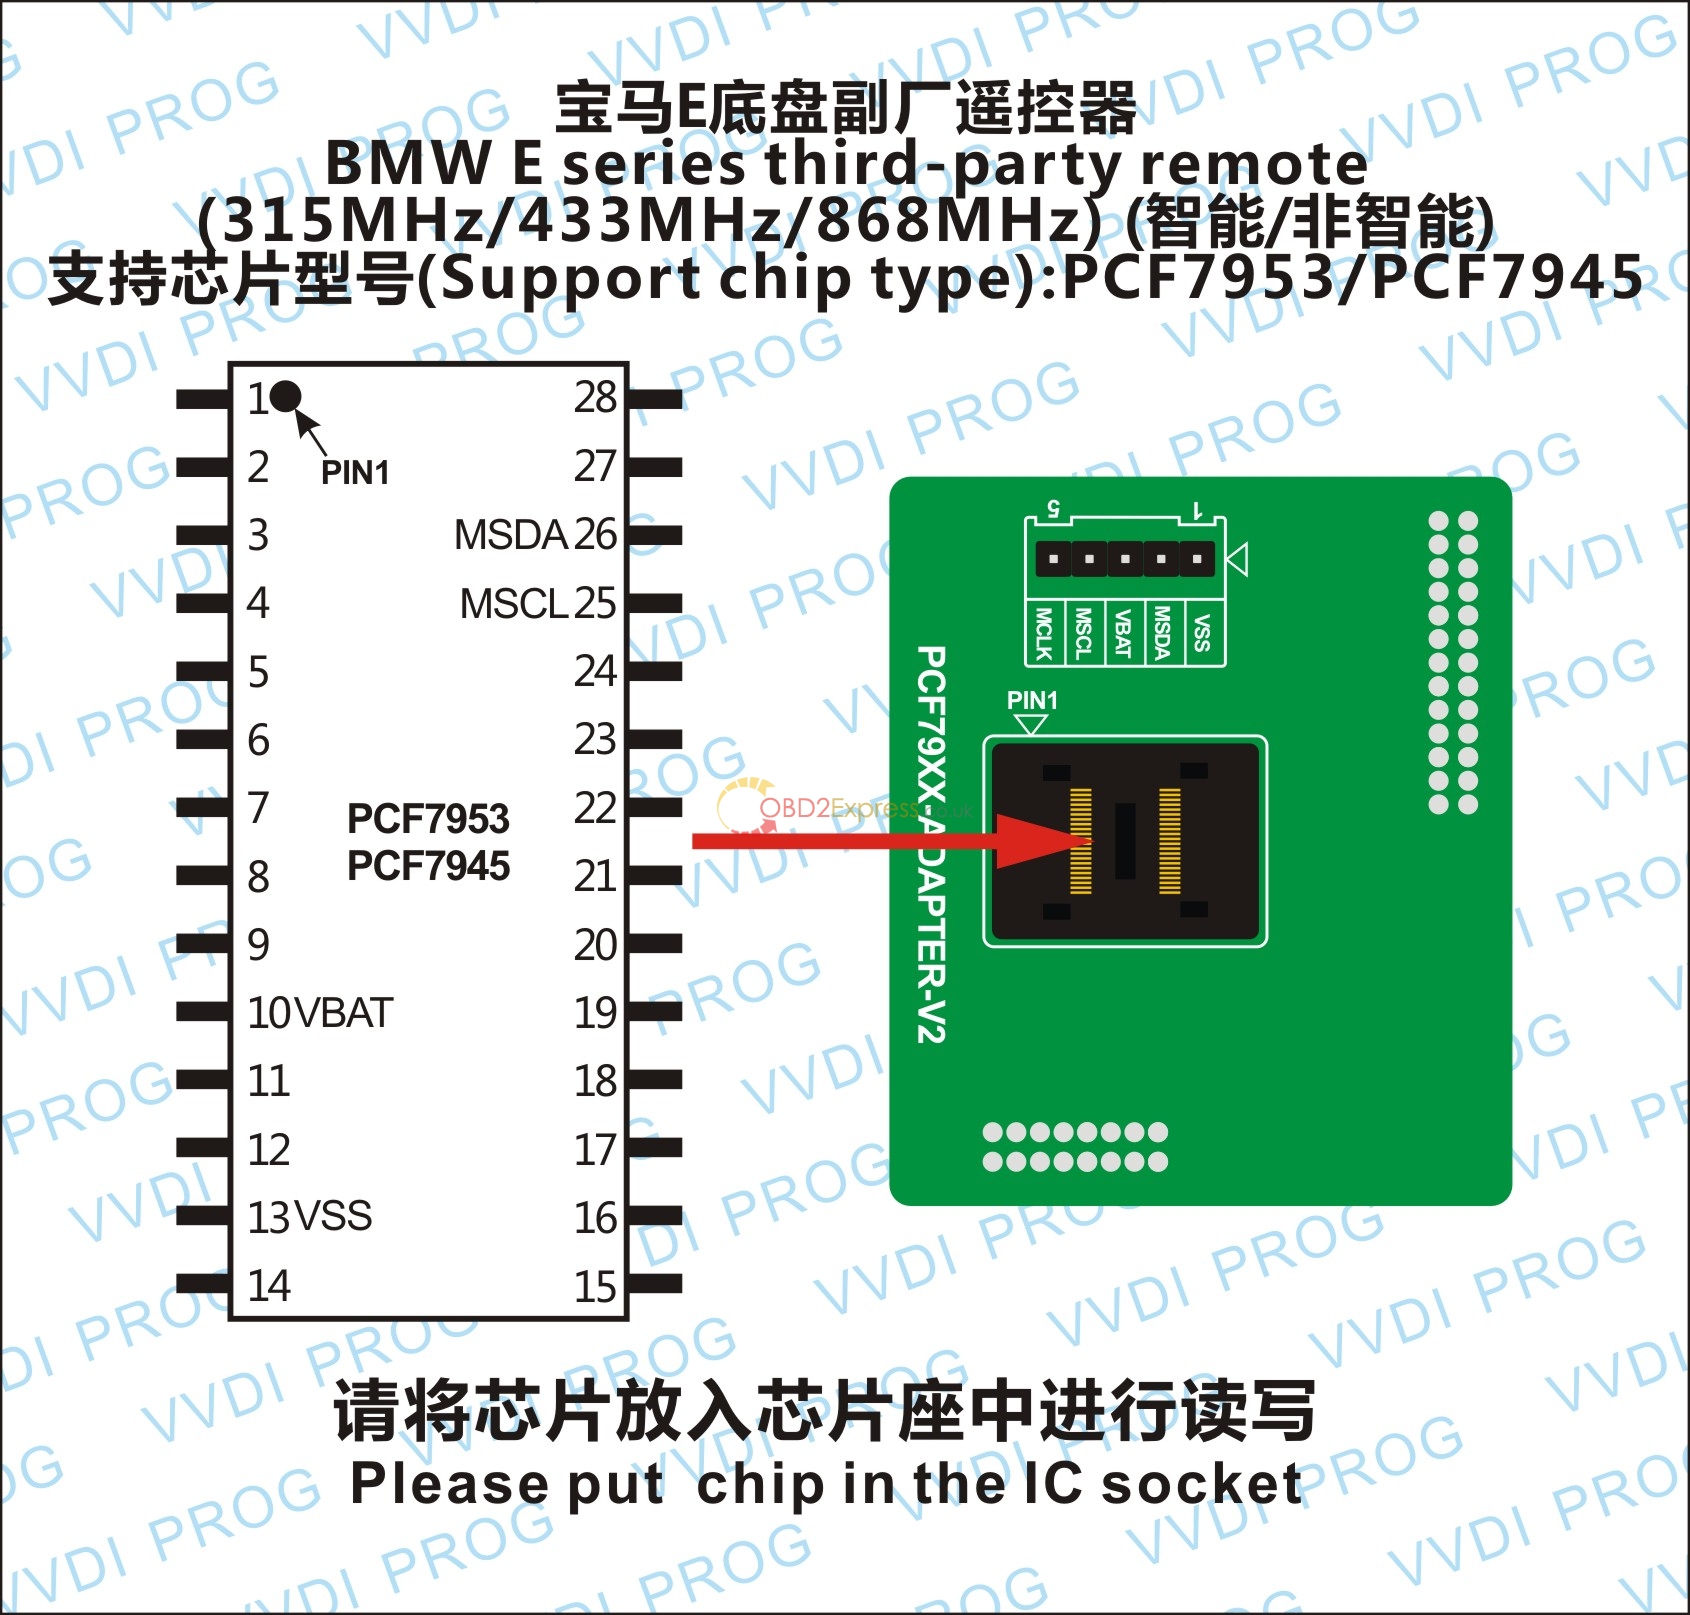 BMW E SEIRES THIRD PARTY REMOTE RENEW CHIP - How to use PCF79xx-ADAPTER-V12 for VVDI PROG 4.1.2 -